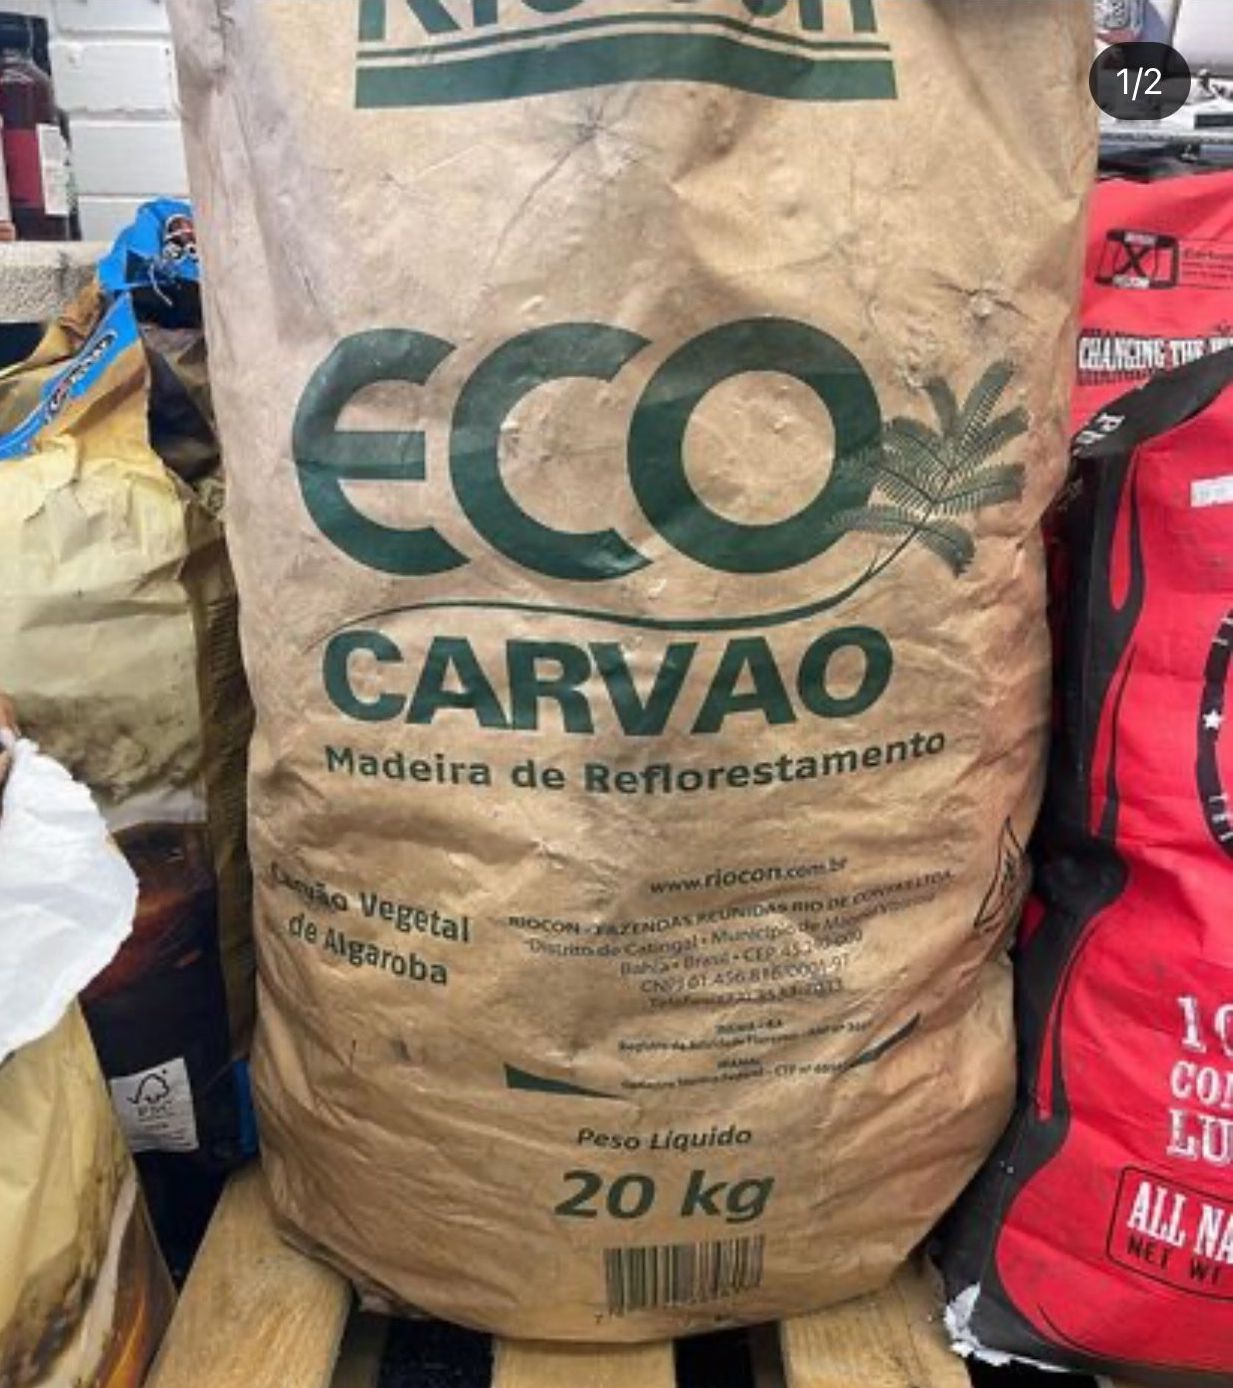 Consumer Reports Bamboo Charcoal Bags - YouTube